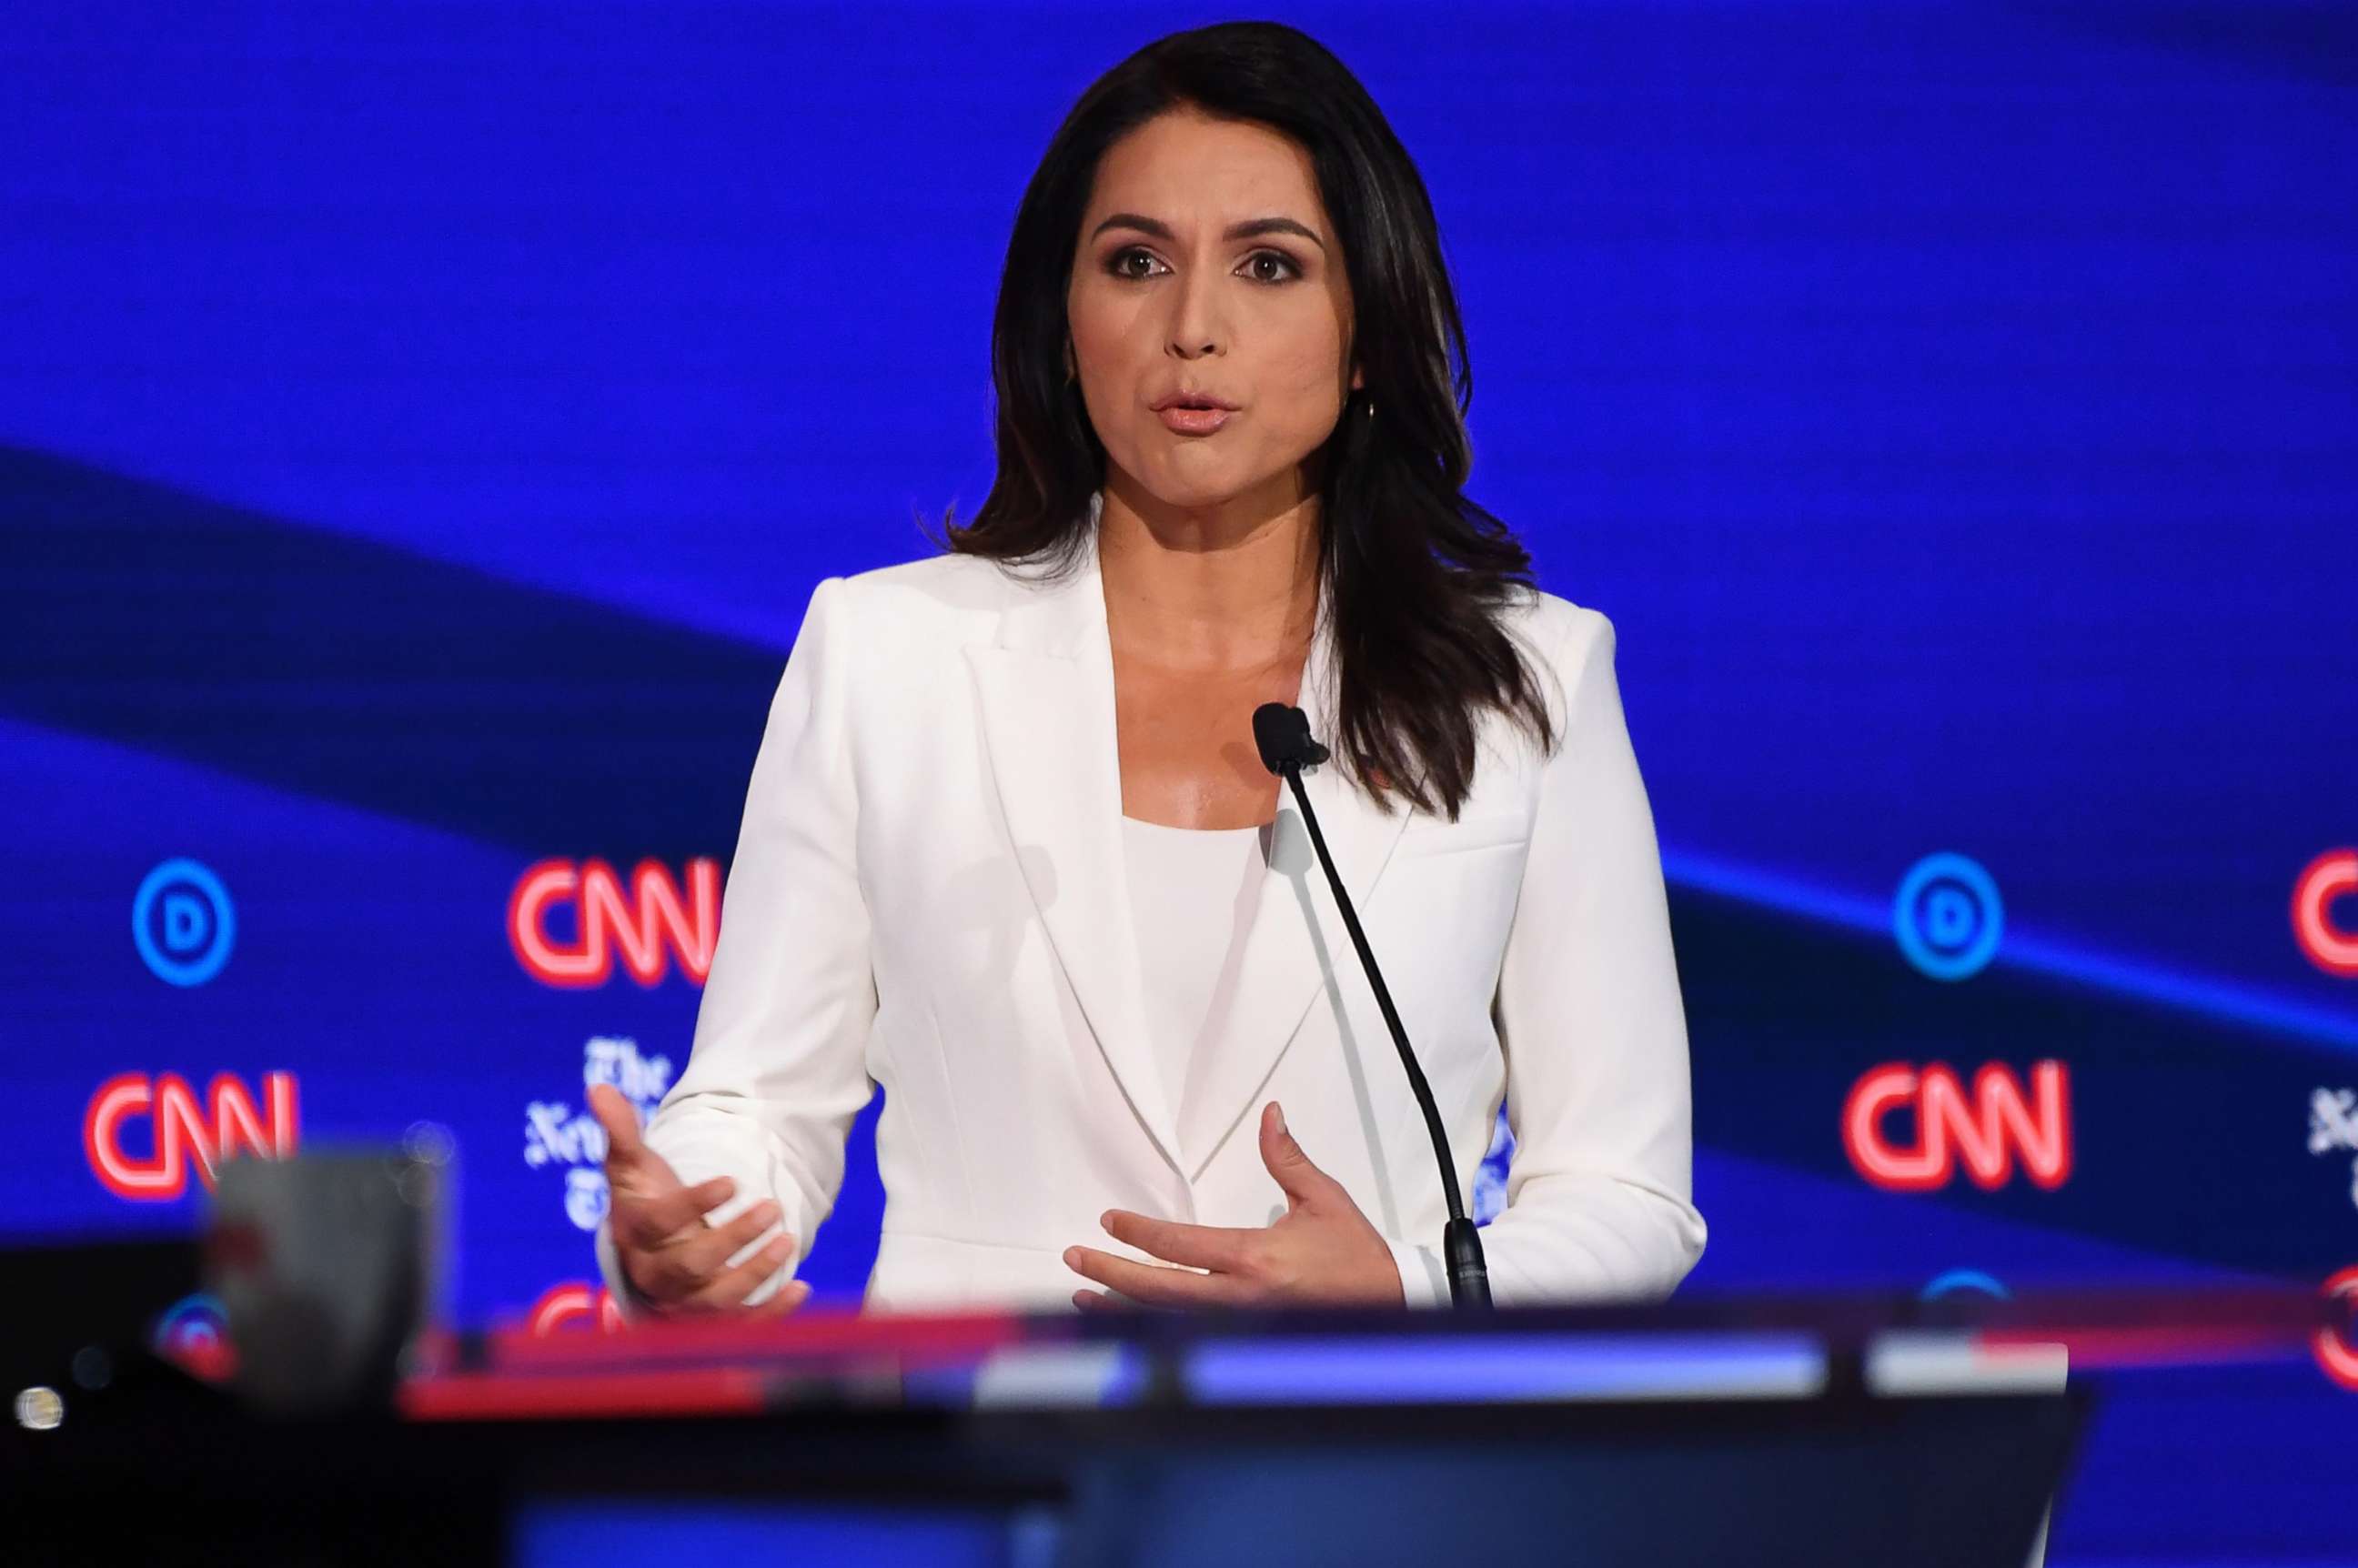 PHOTO: Democratic presidential hopeful Tulsi Gabbard speaks during the fourth Democratic primary debate of the 2020 presidential campaign season in Westerville, Ohio on Oct. 15, 2019.